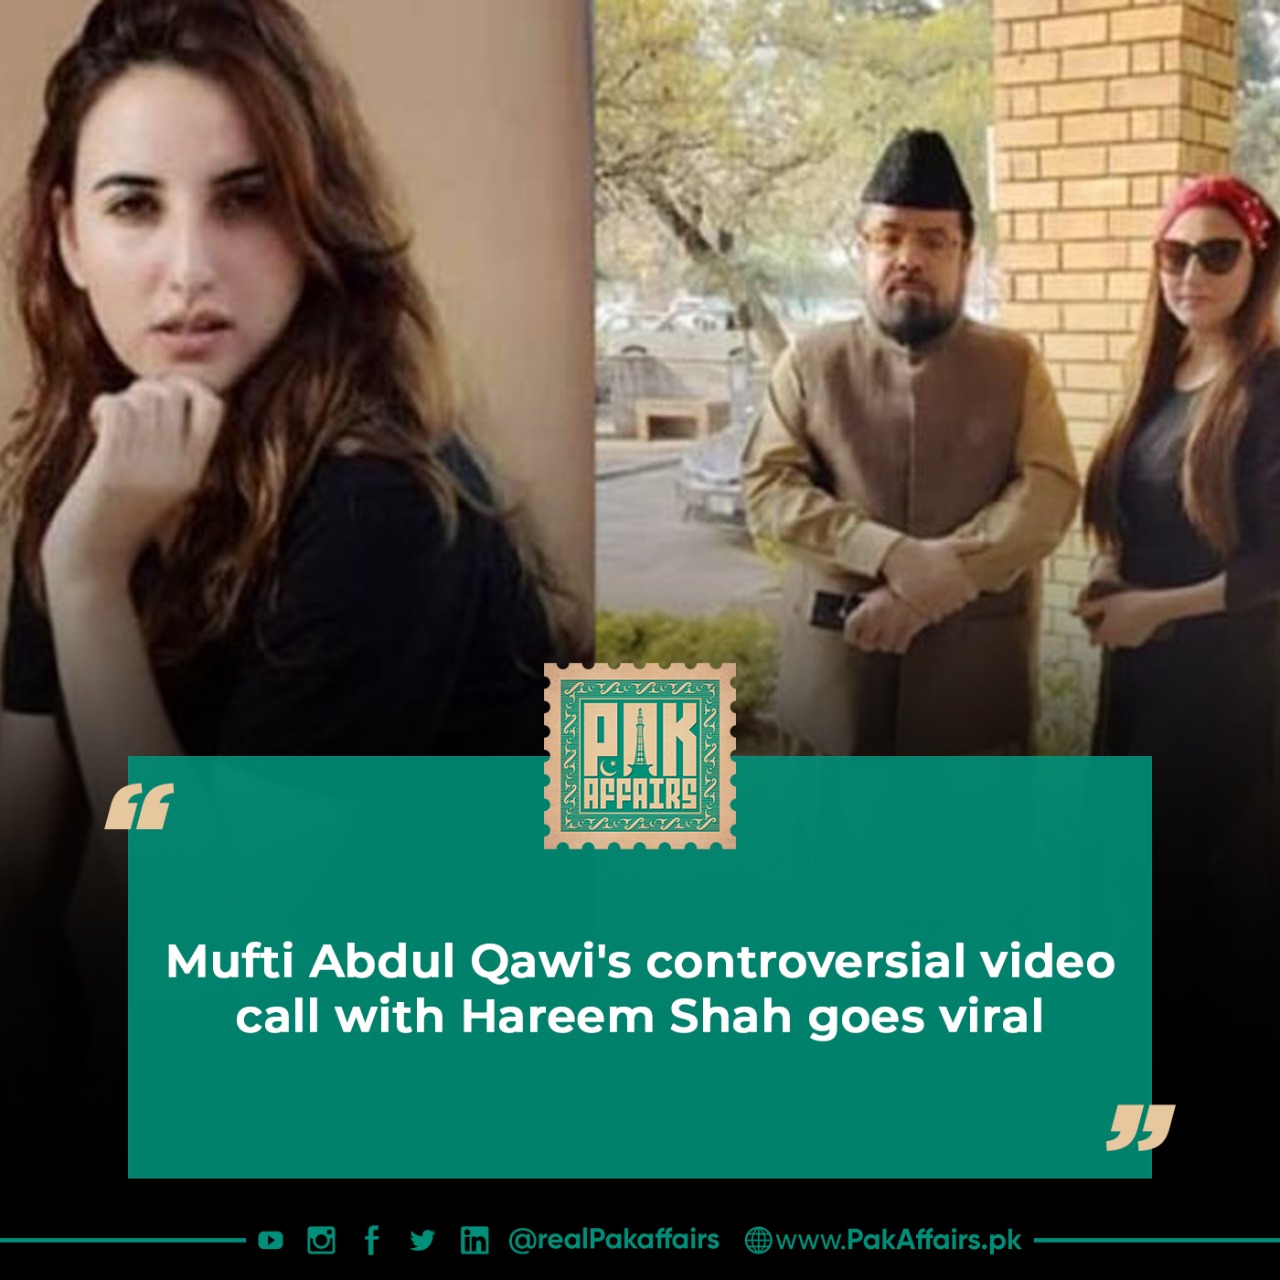 Mufti Abdul Qawi's controversial video call with Hareem Shah goes viral